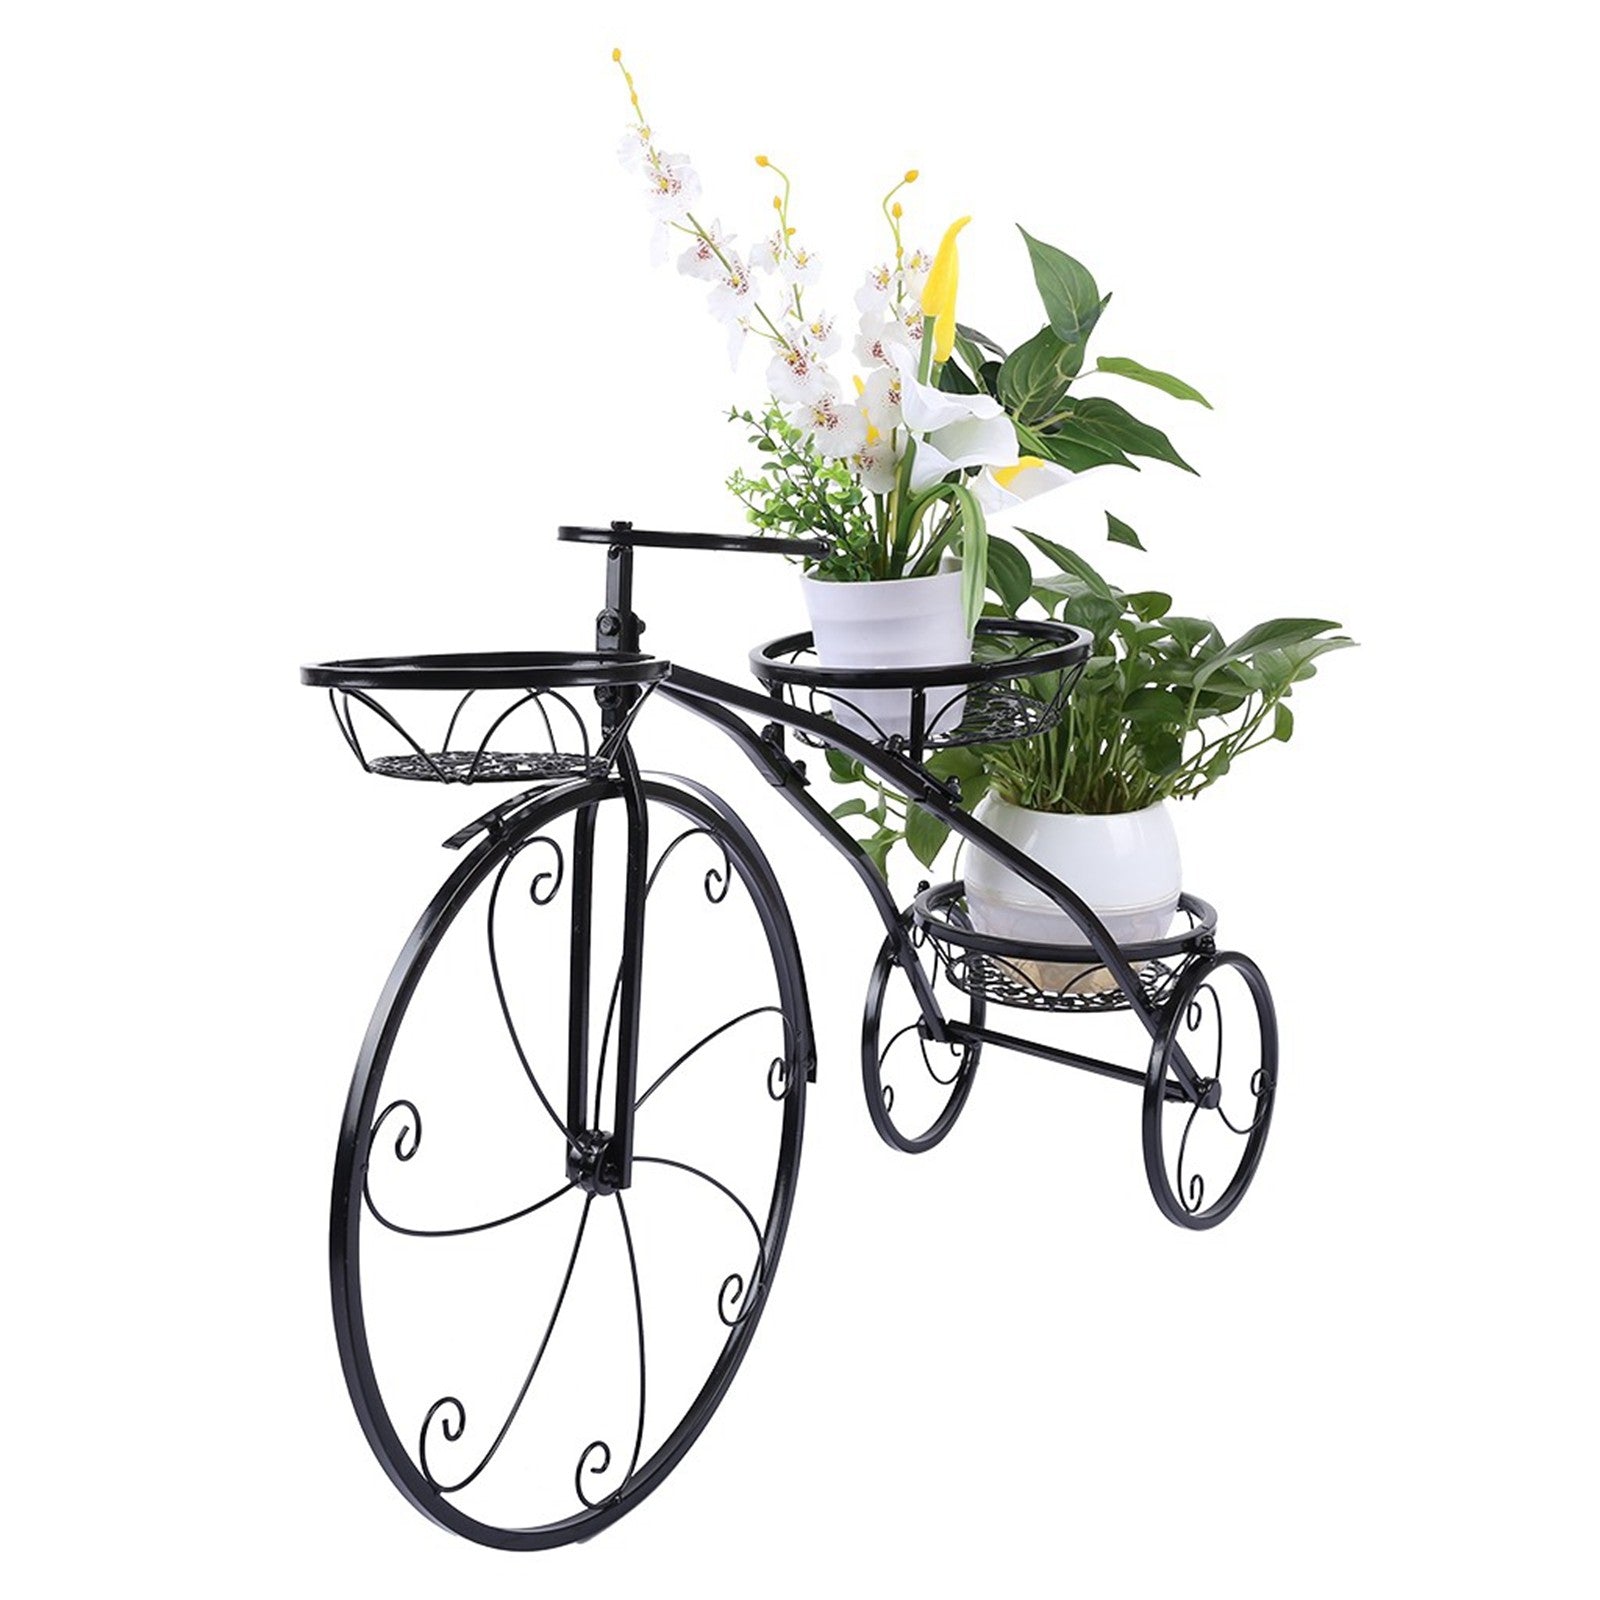 Tricycle Plant Stand Flower Pot Cart Holder Ideal For Home Garden And Patio